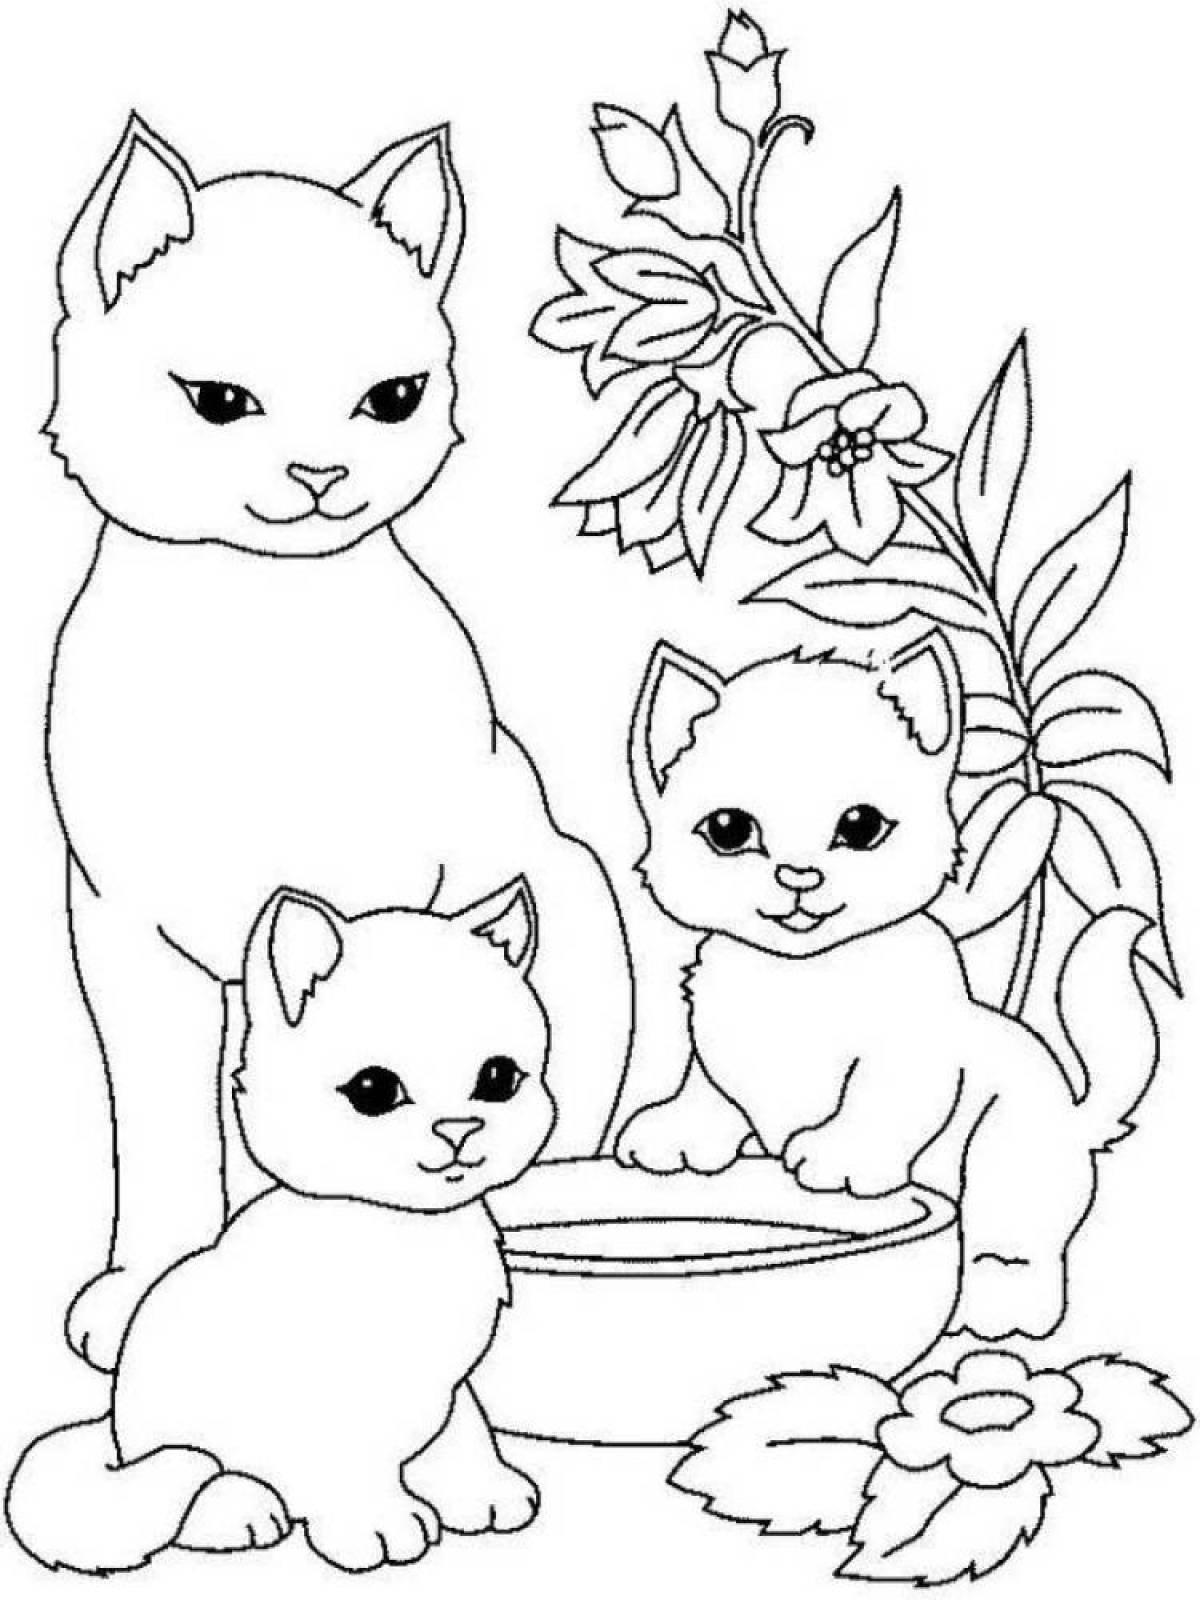 Playful cat coloring book for kids